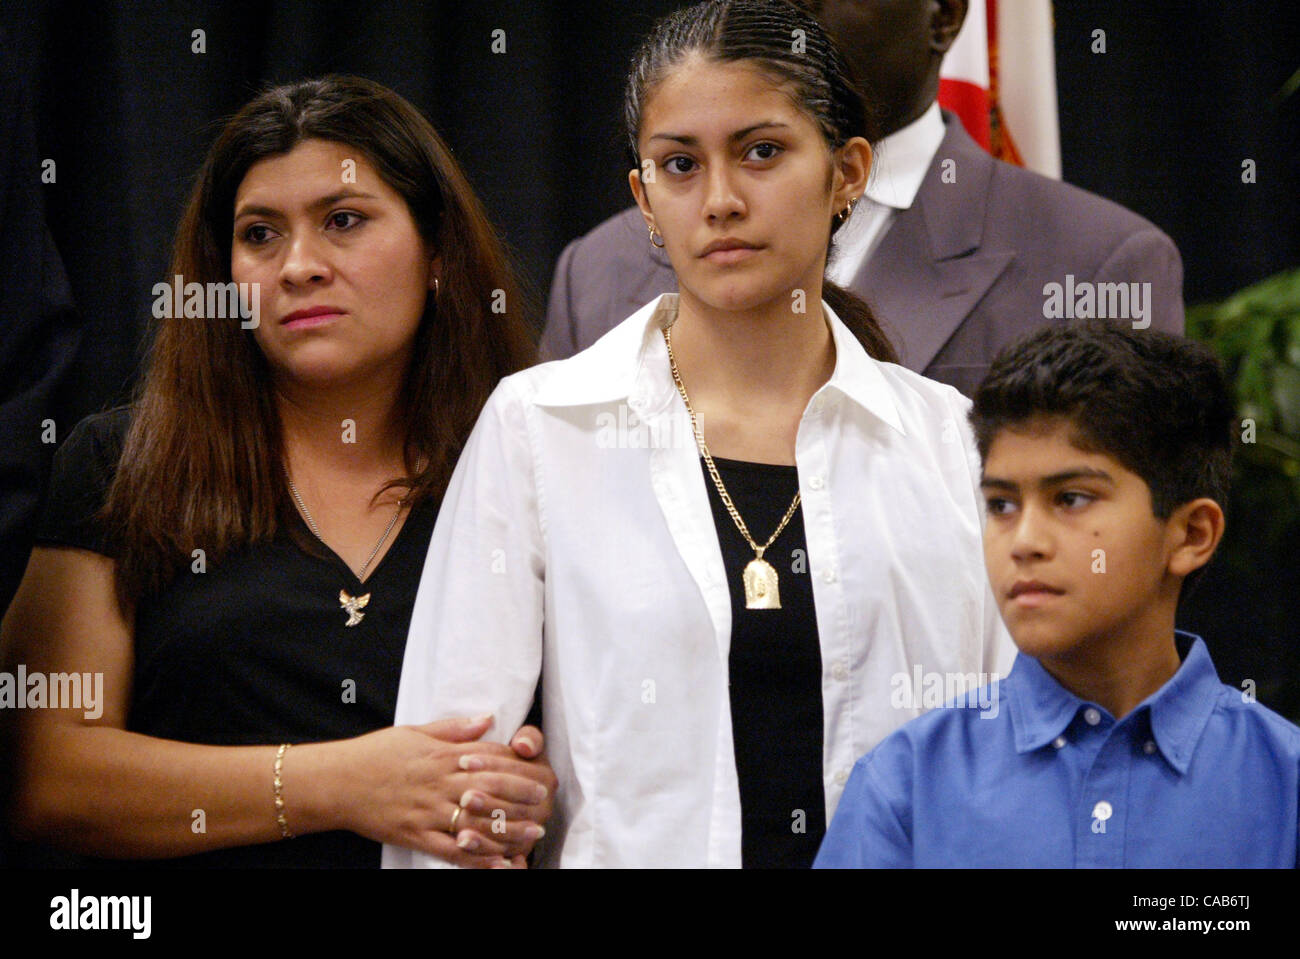 051404 met migrant3--Immokalee, Fla.--Evangelina Bahena, left, with her daughter Gabriela Bahena, 13, and son Xavier Bahena, 9, all of DeLeon Springs, Fla. at a ceremony recognizing the Alfredo Bahena Act, a new law named after her husband who was killed in an accident April 18, 2003, signed by Gove Stock Photo